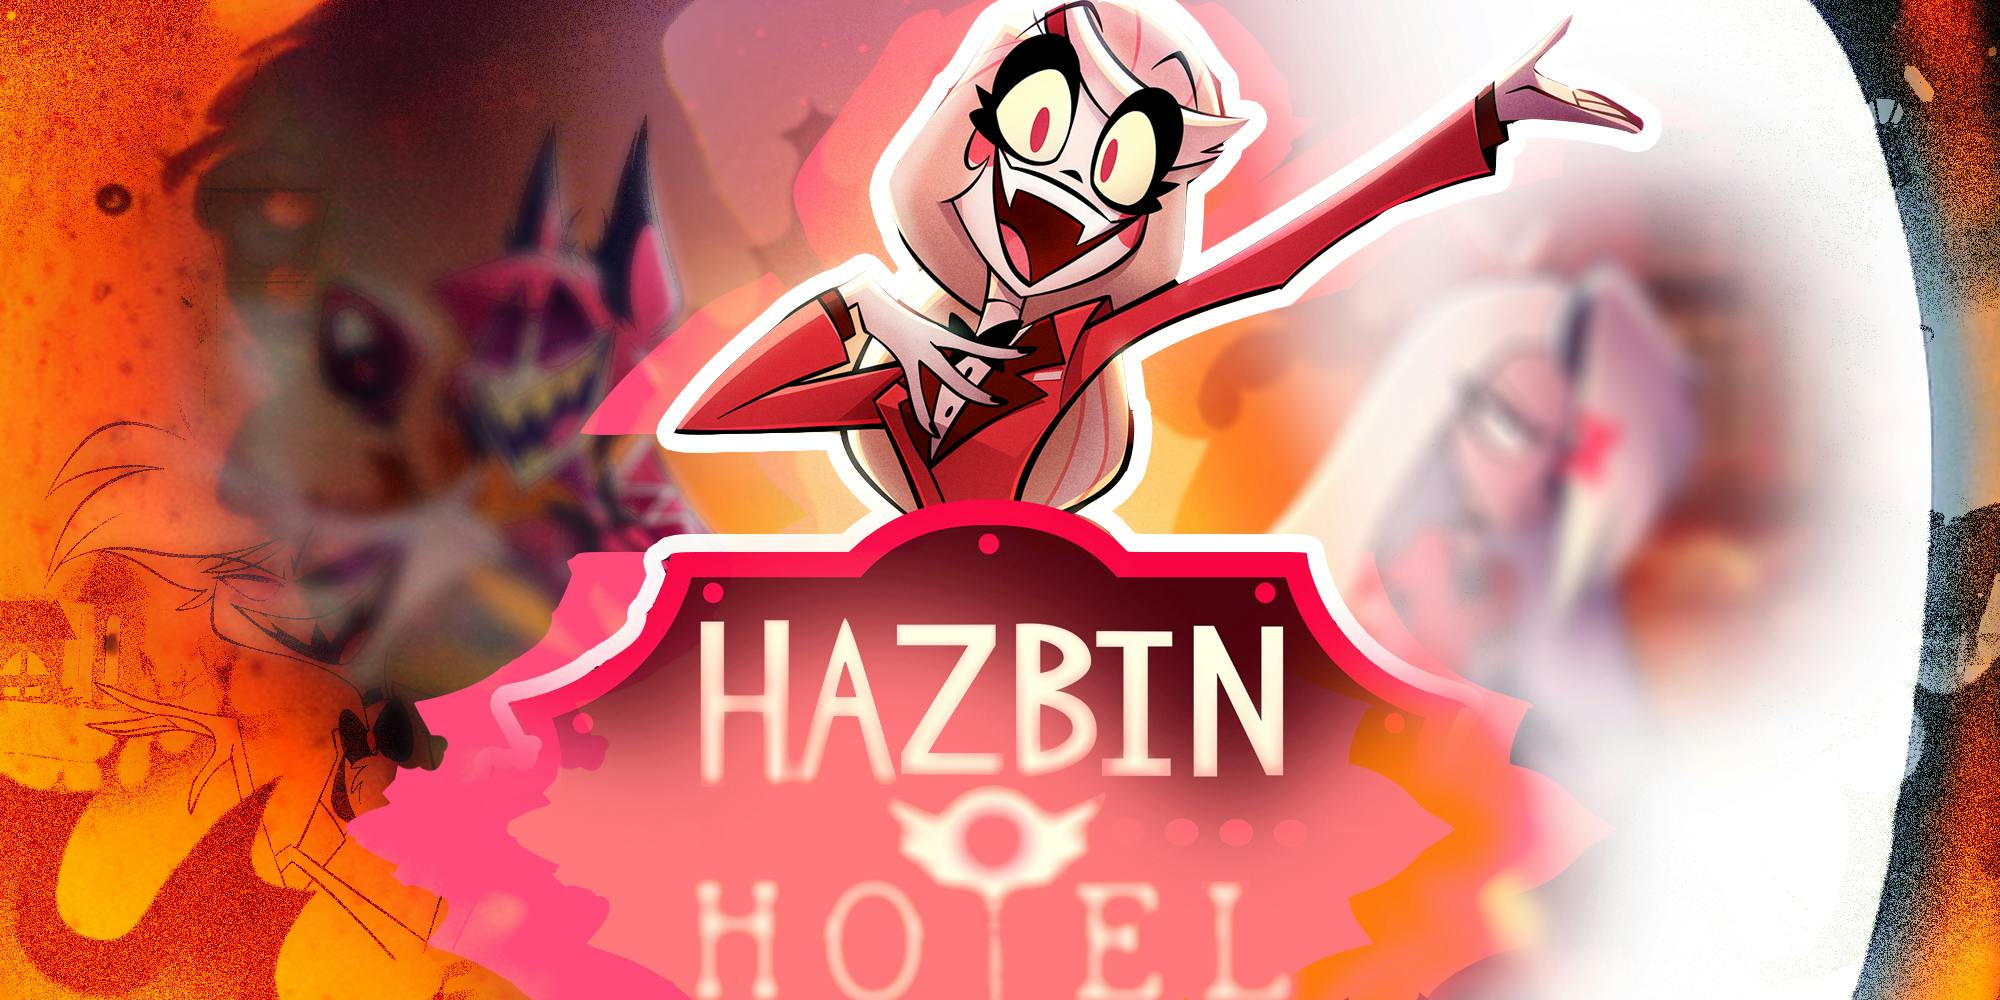 ‘Hazbin Hotel’ Animators Expected a ‘Passion Project’ But Got a Helluva Time